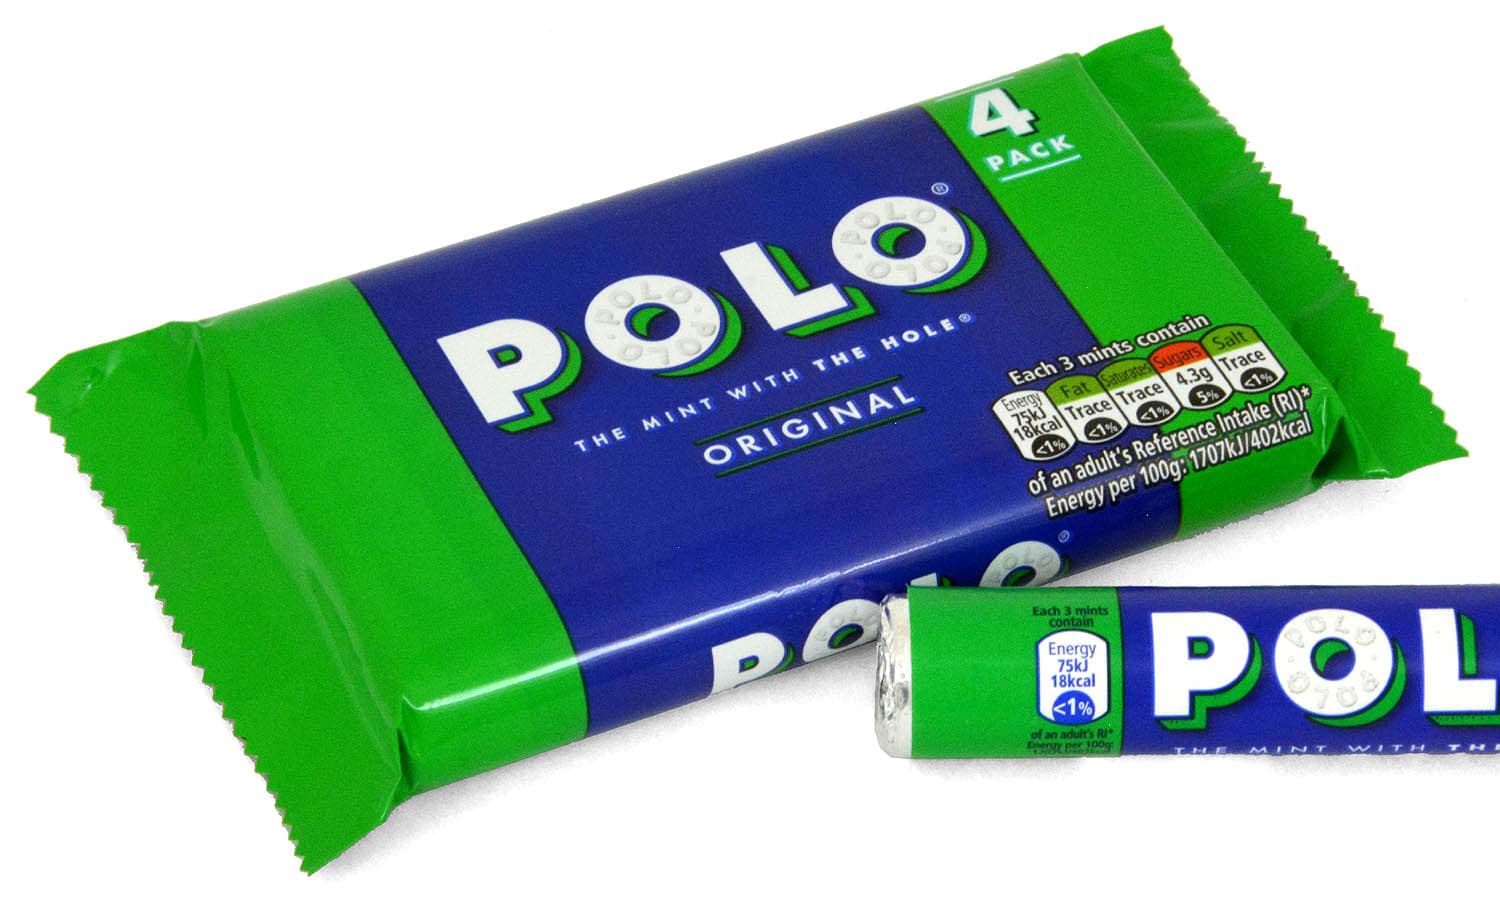 Picture of Polo Original Mint Multipack 4 x 34g